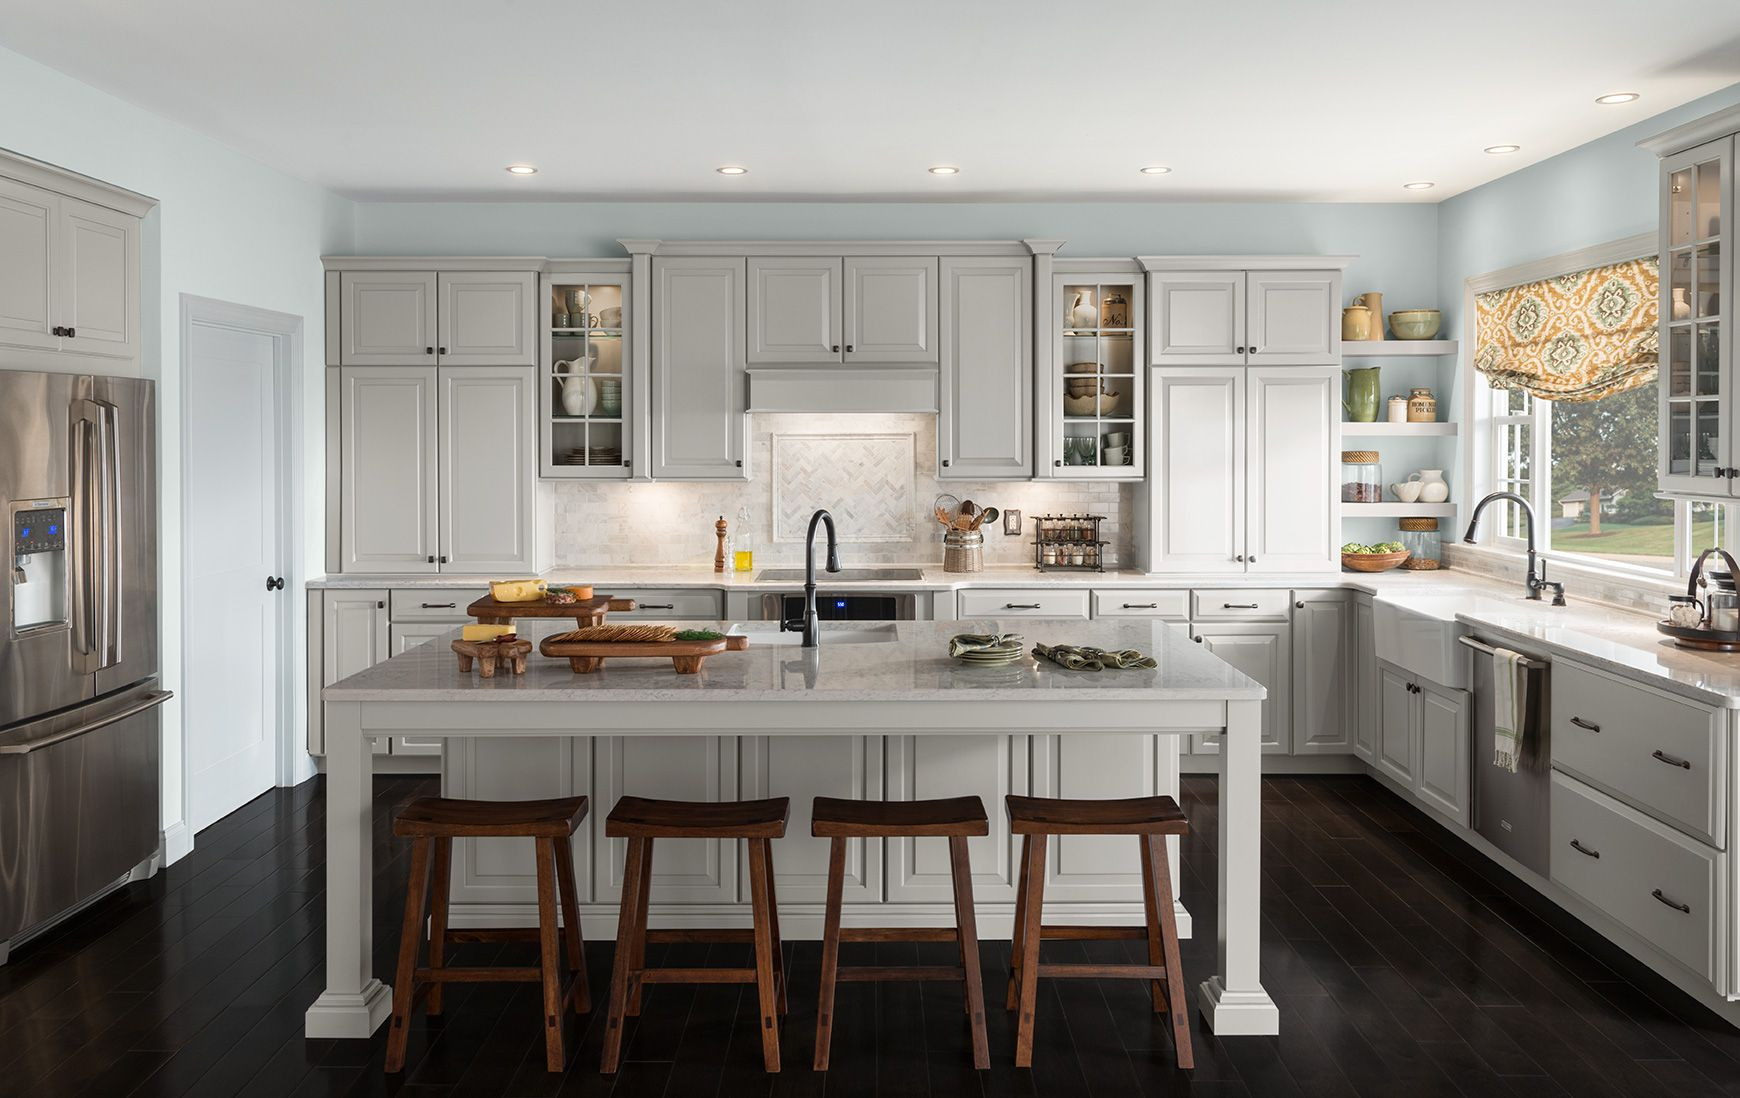 25 Exellent Shenandoah Kitchen Cabinets - Home, Family, Style and Art Ideas